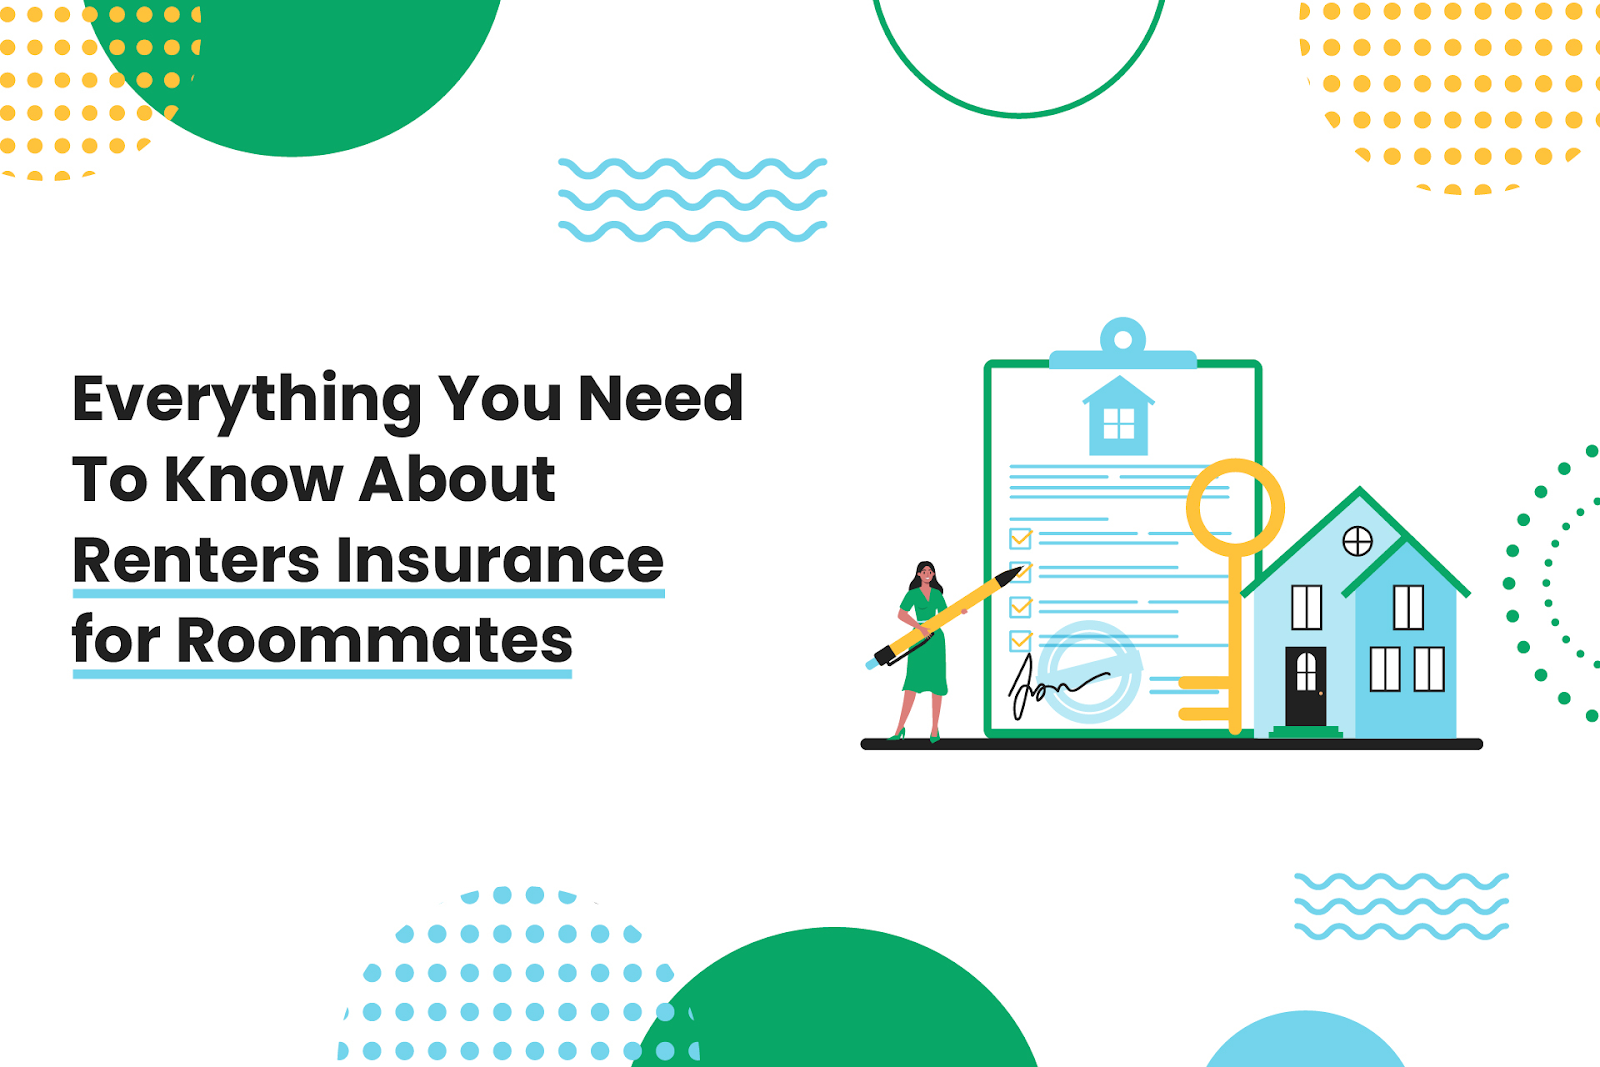 What You Need To Know About Renters Insurance for Roommates.